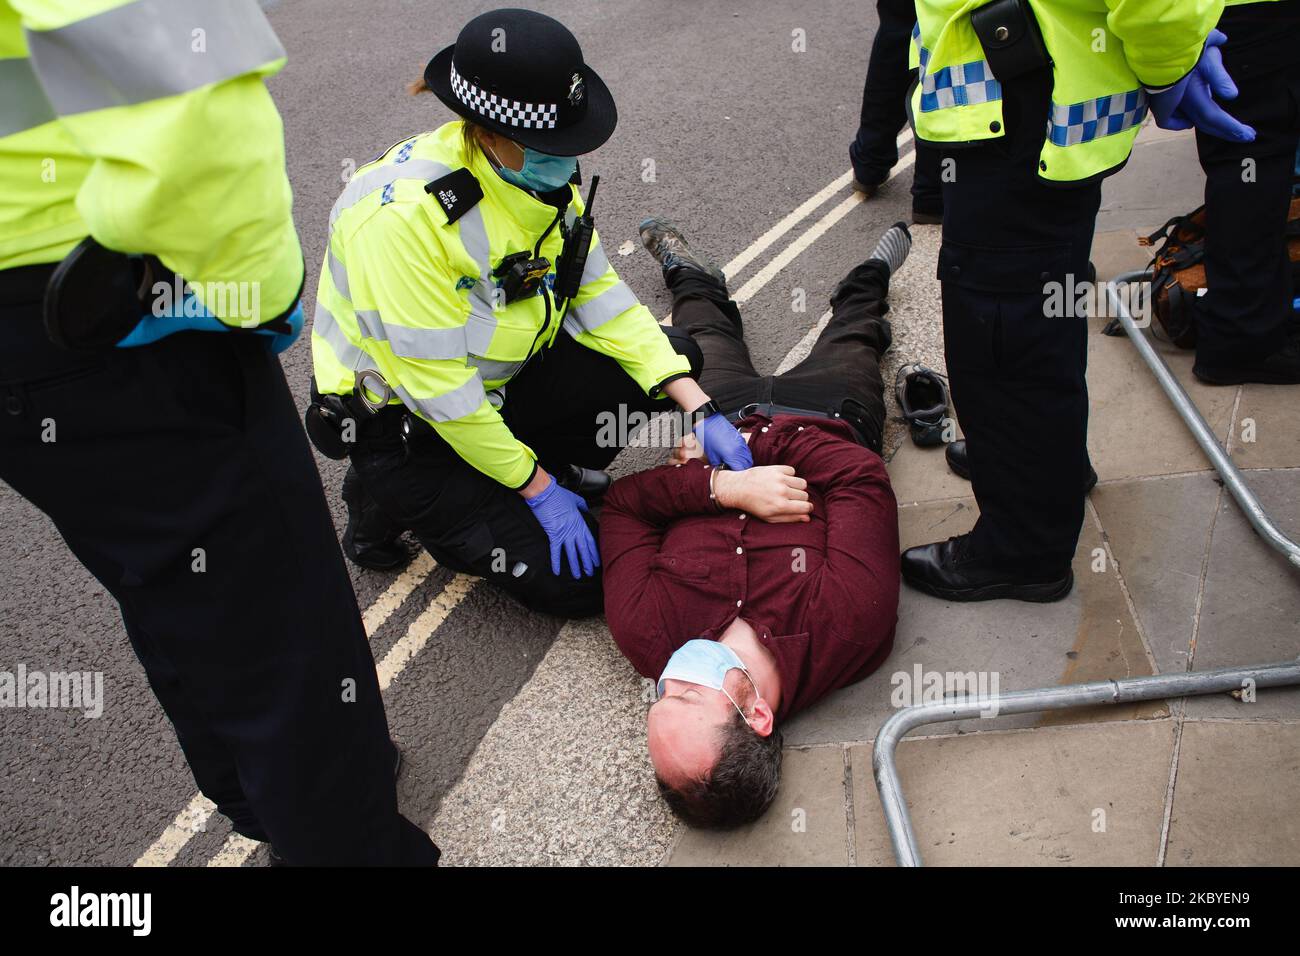 Police officers surround an arrested and handcuffed member of climate change activist movement Extinction Rebellion in Parliament Square in London, England, on September 9, 2020. The group resumed protests in the city last Monday, staging demonstrations most days since, after a hiatus in its actions during the height of the coronavirus crisis. (Photo by David Cliff/NurPhoto) Stock Photo